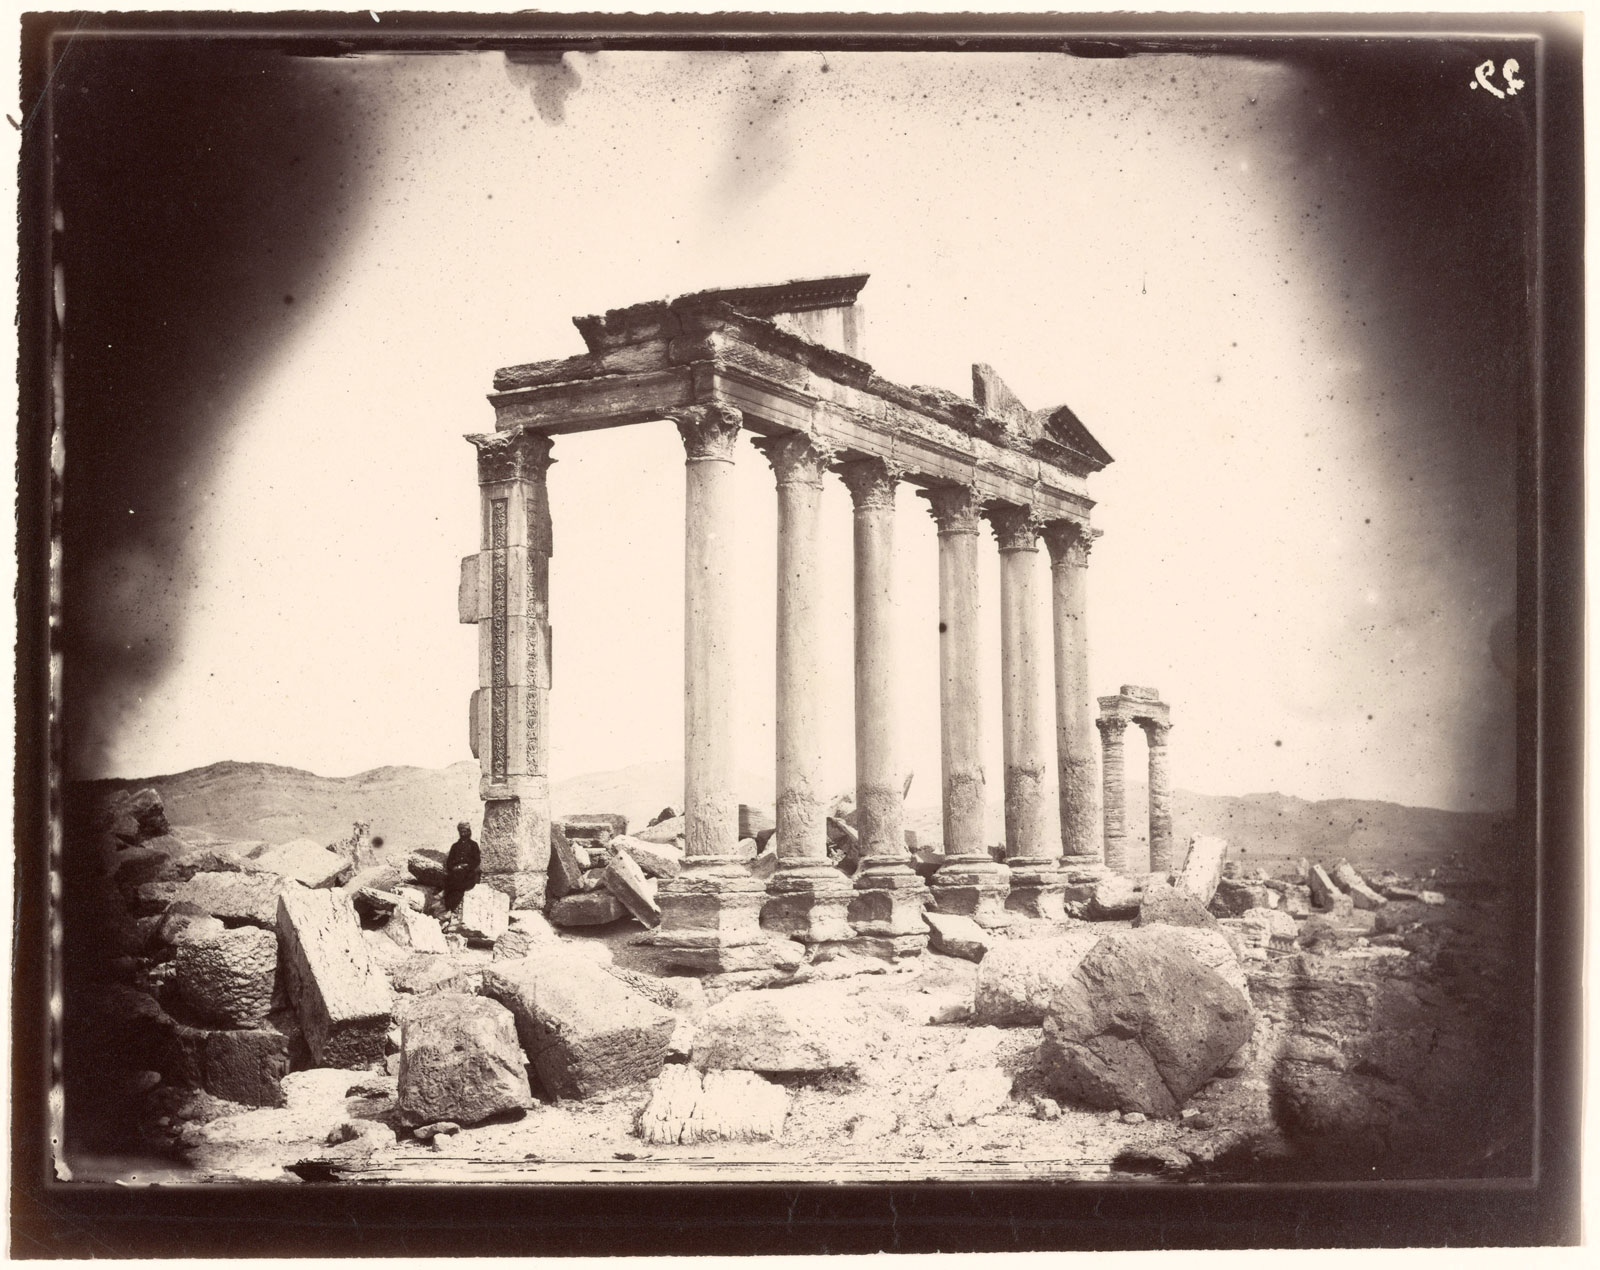 Man leaning against a Column of Funerary Temple no. 86 